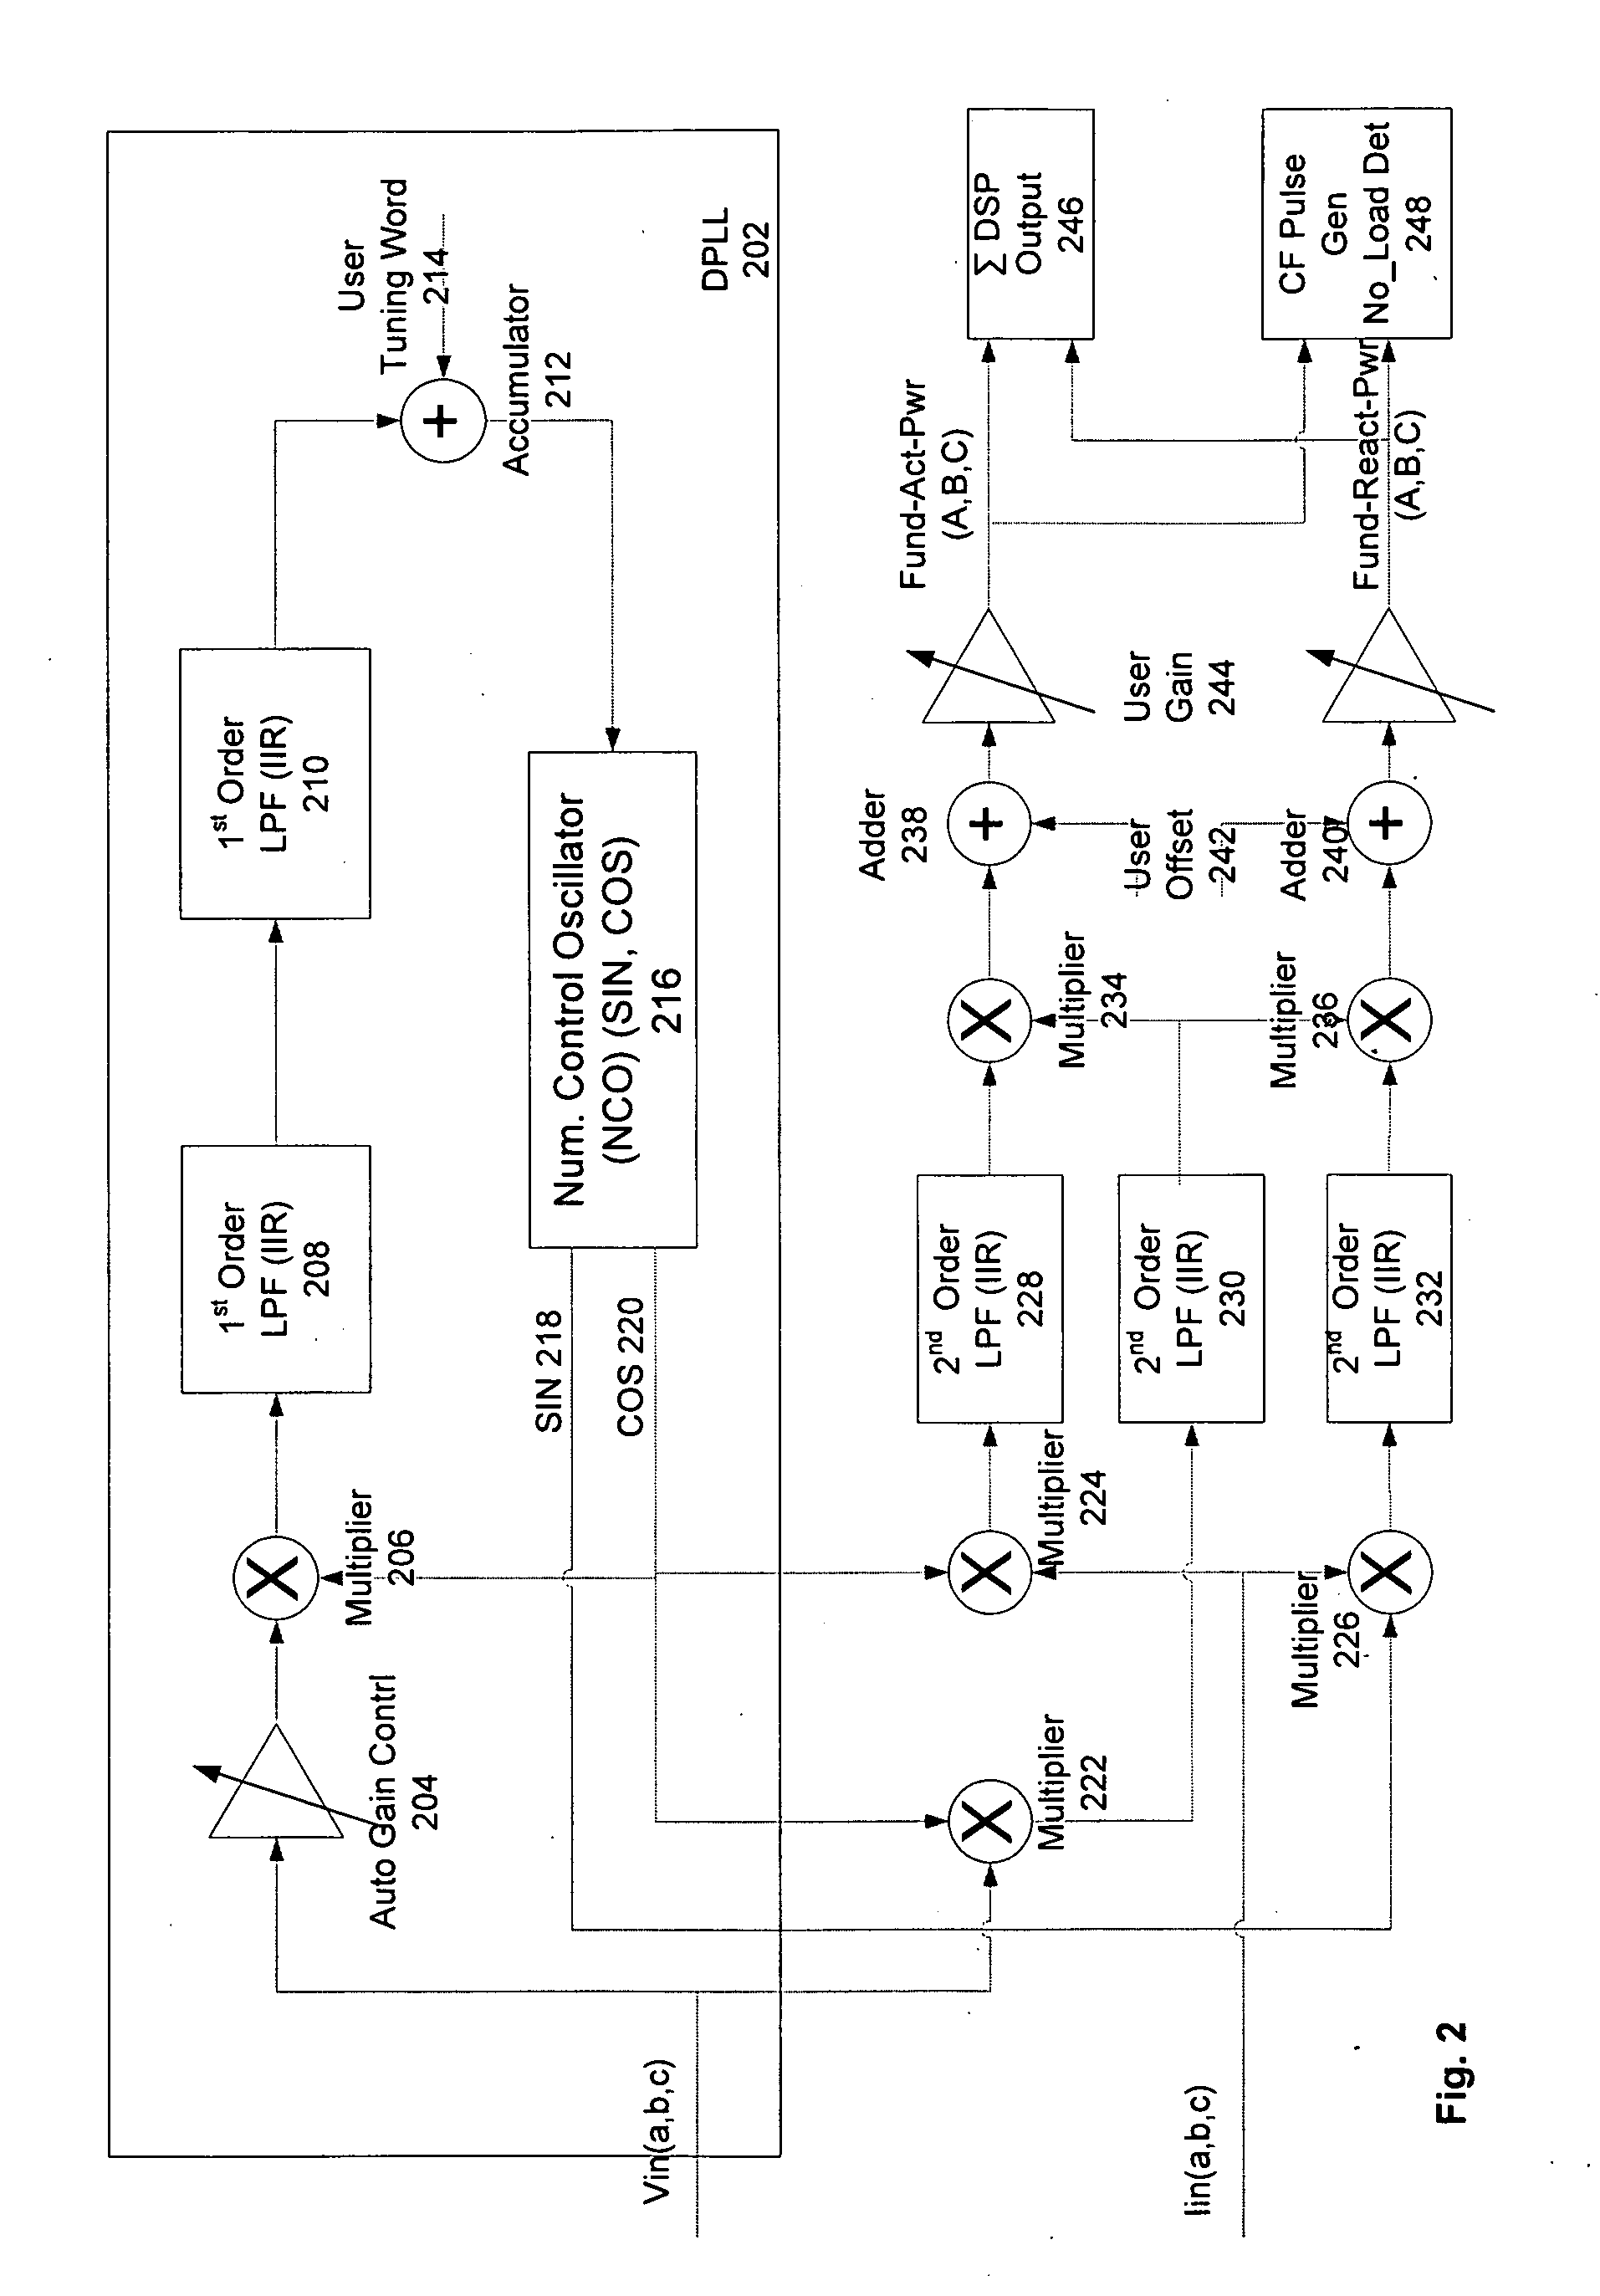 Apparatus and method for measuring active and reactive powers